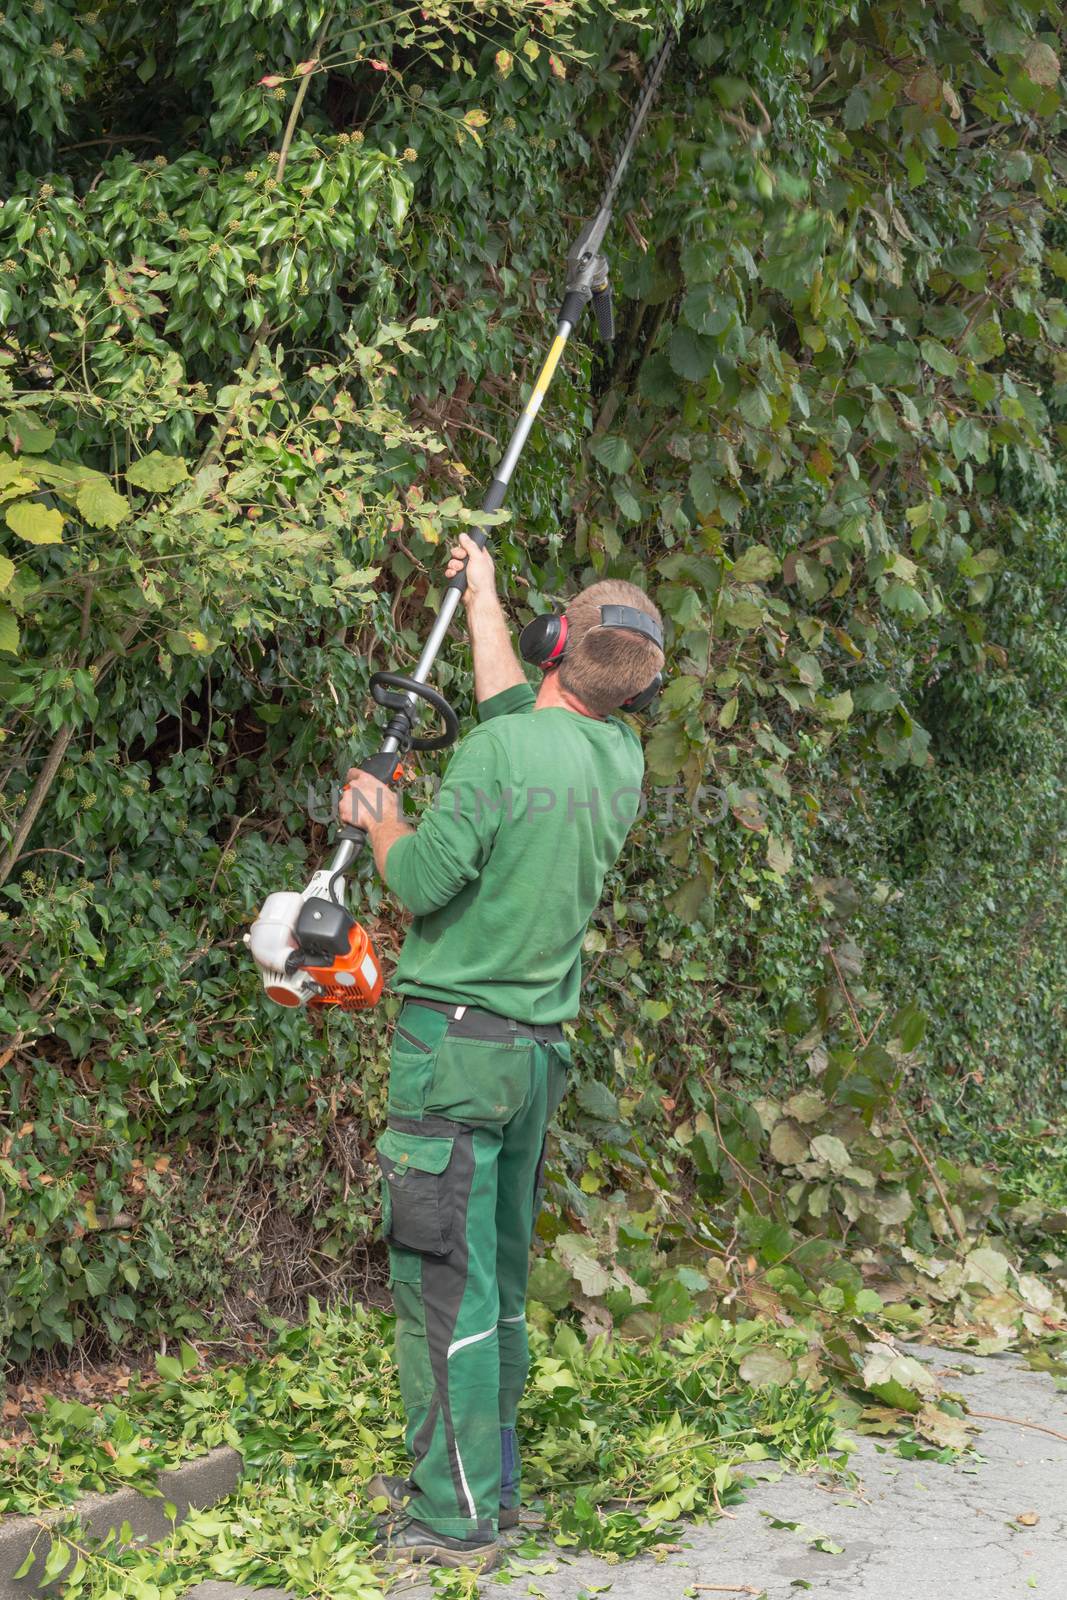 Cutting a hedge  by JFsPic